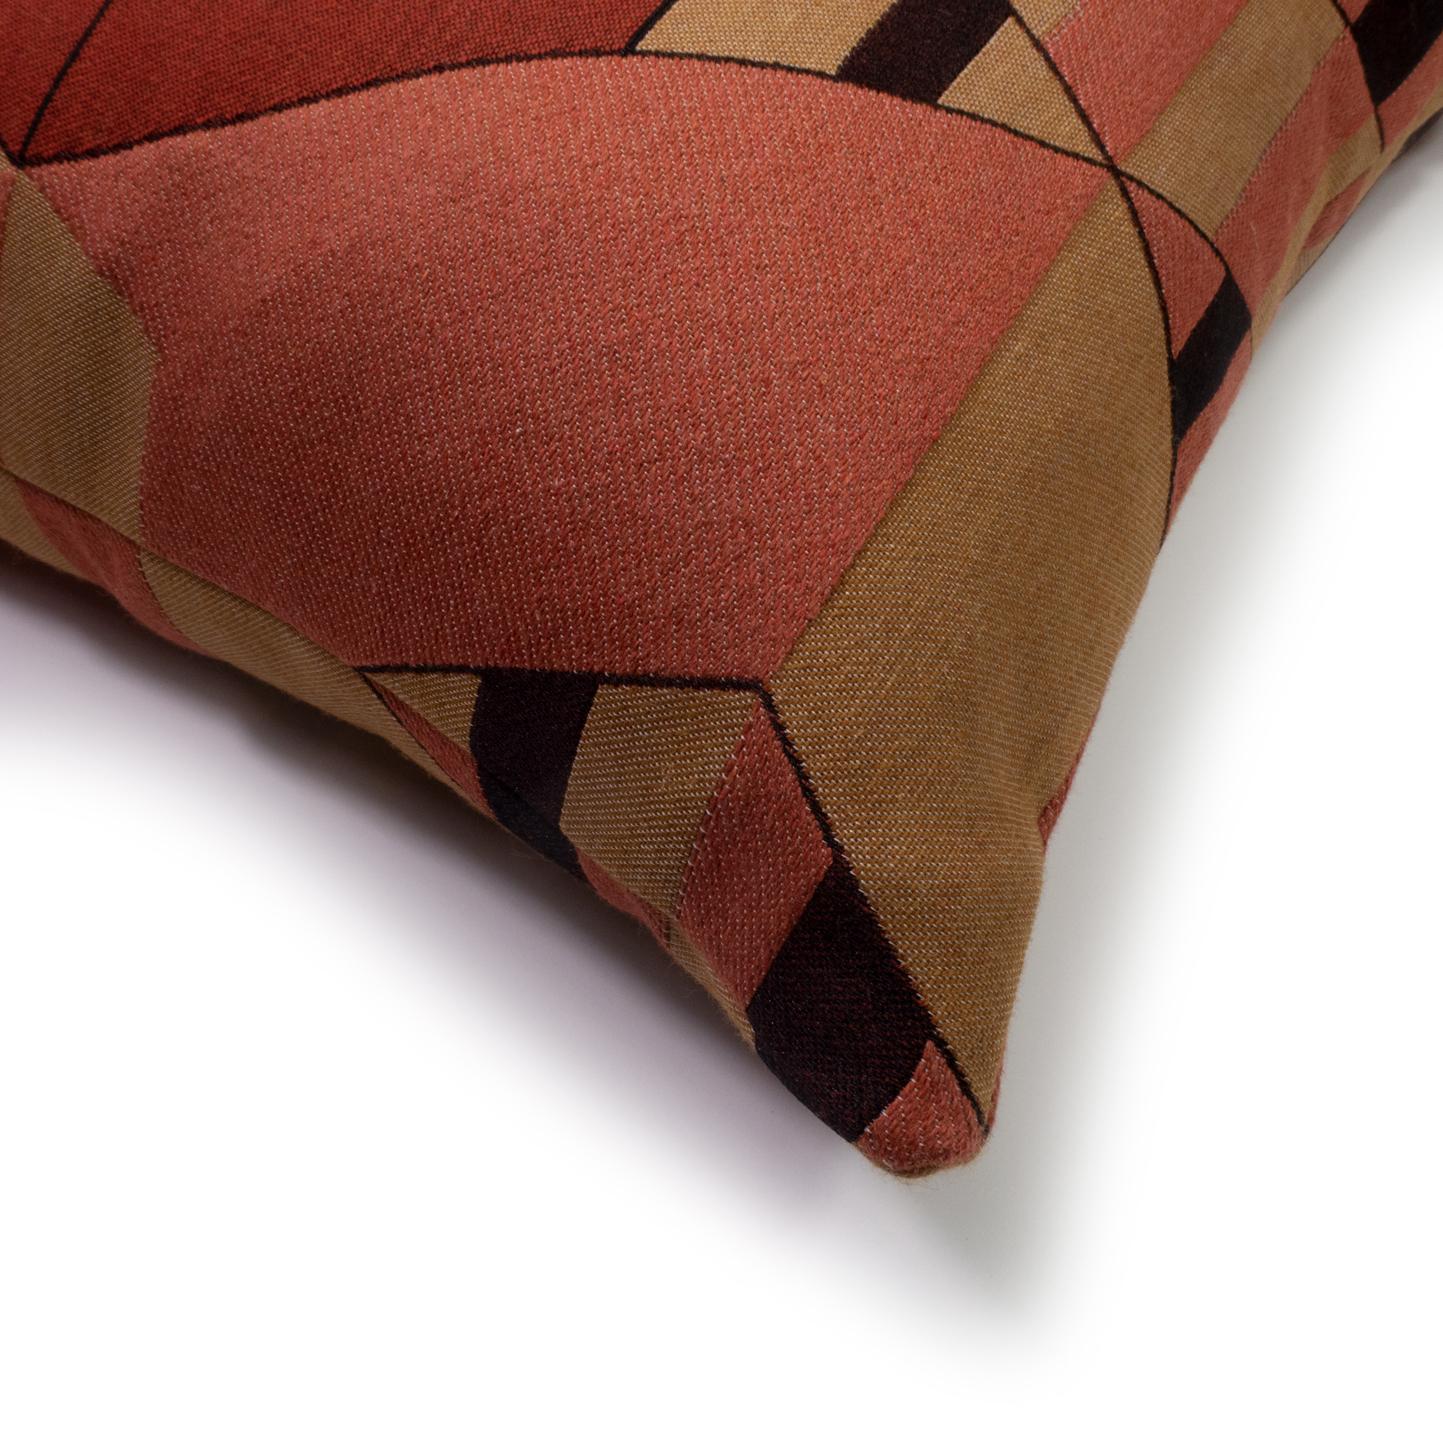 Belgian Cushion / Pattern Pillow Absolute Coup De Foudre Red by Evolution21 For Sale